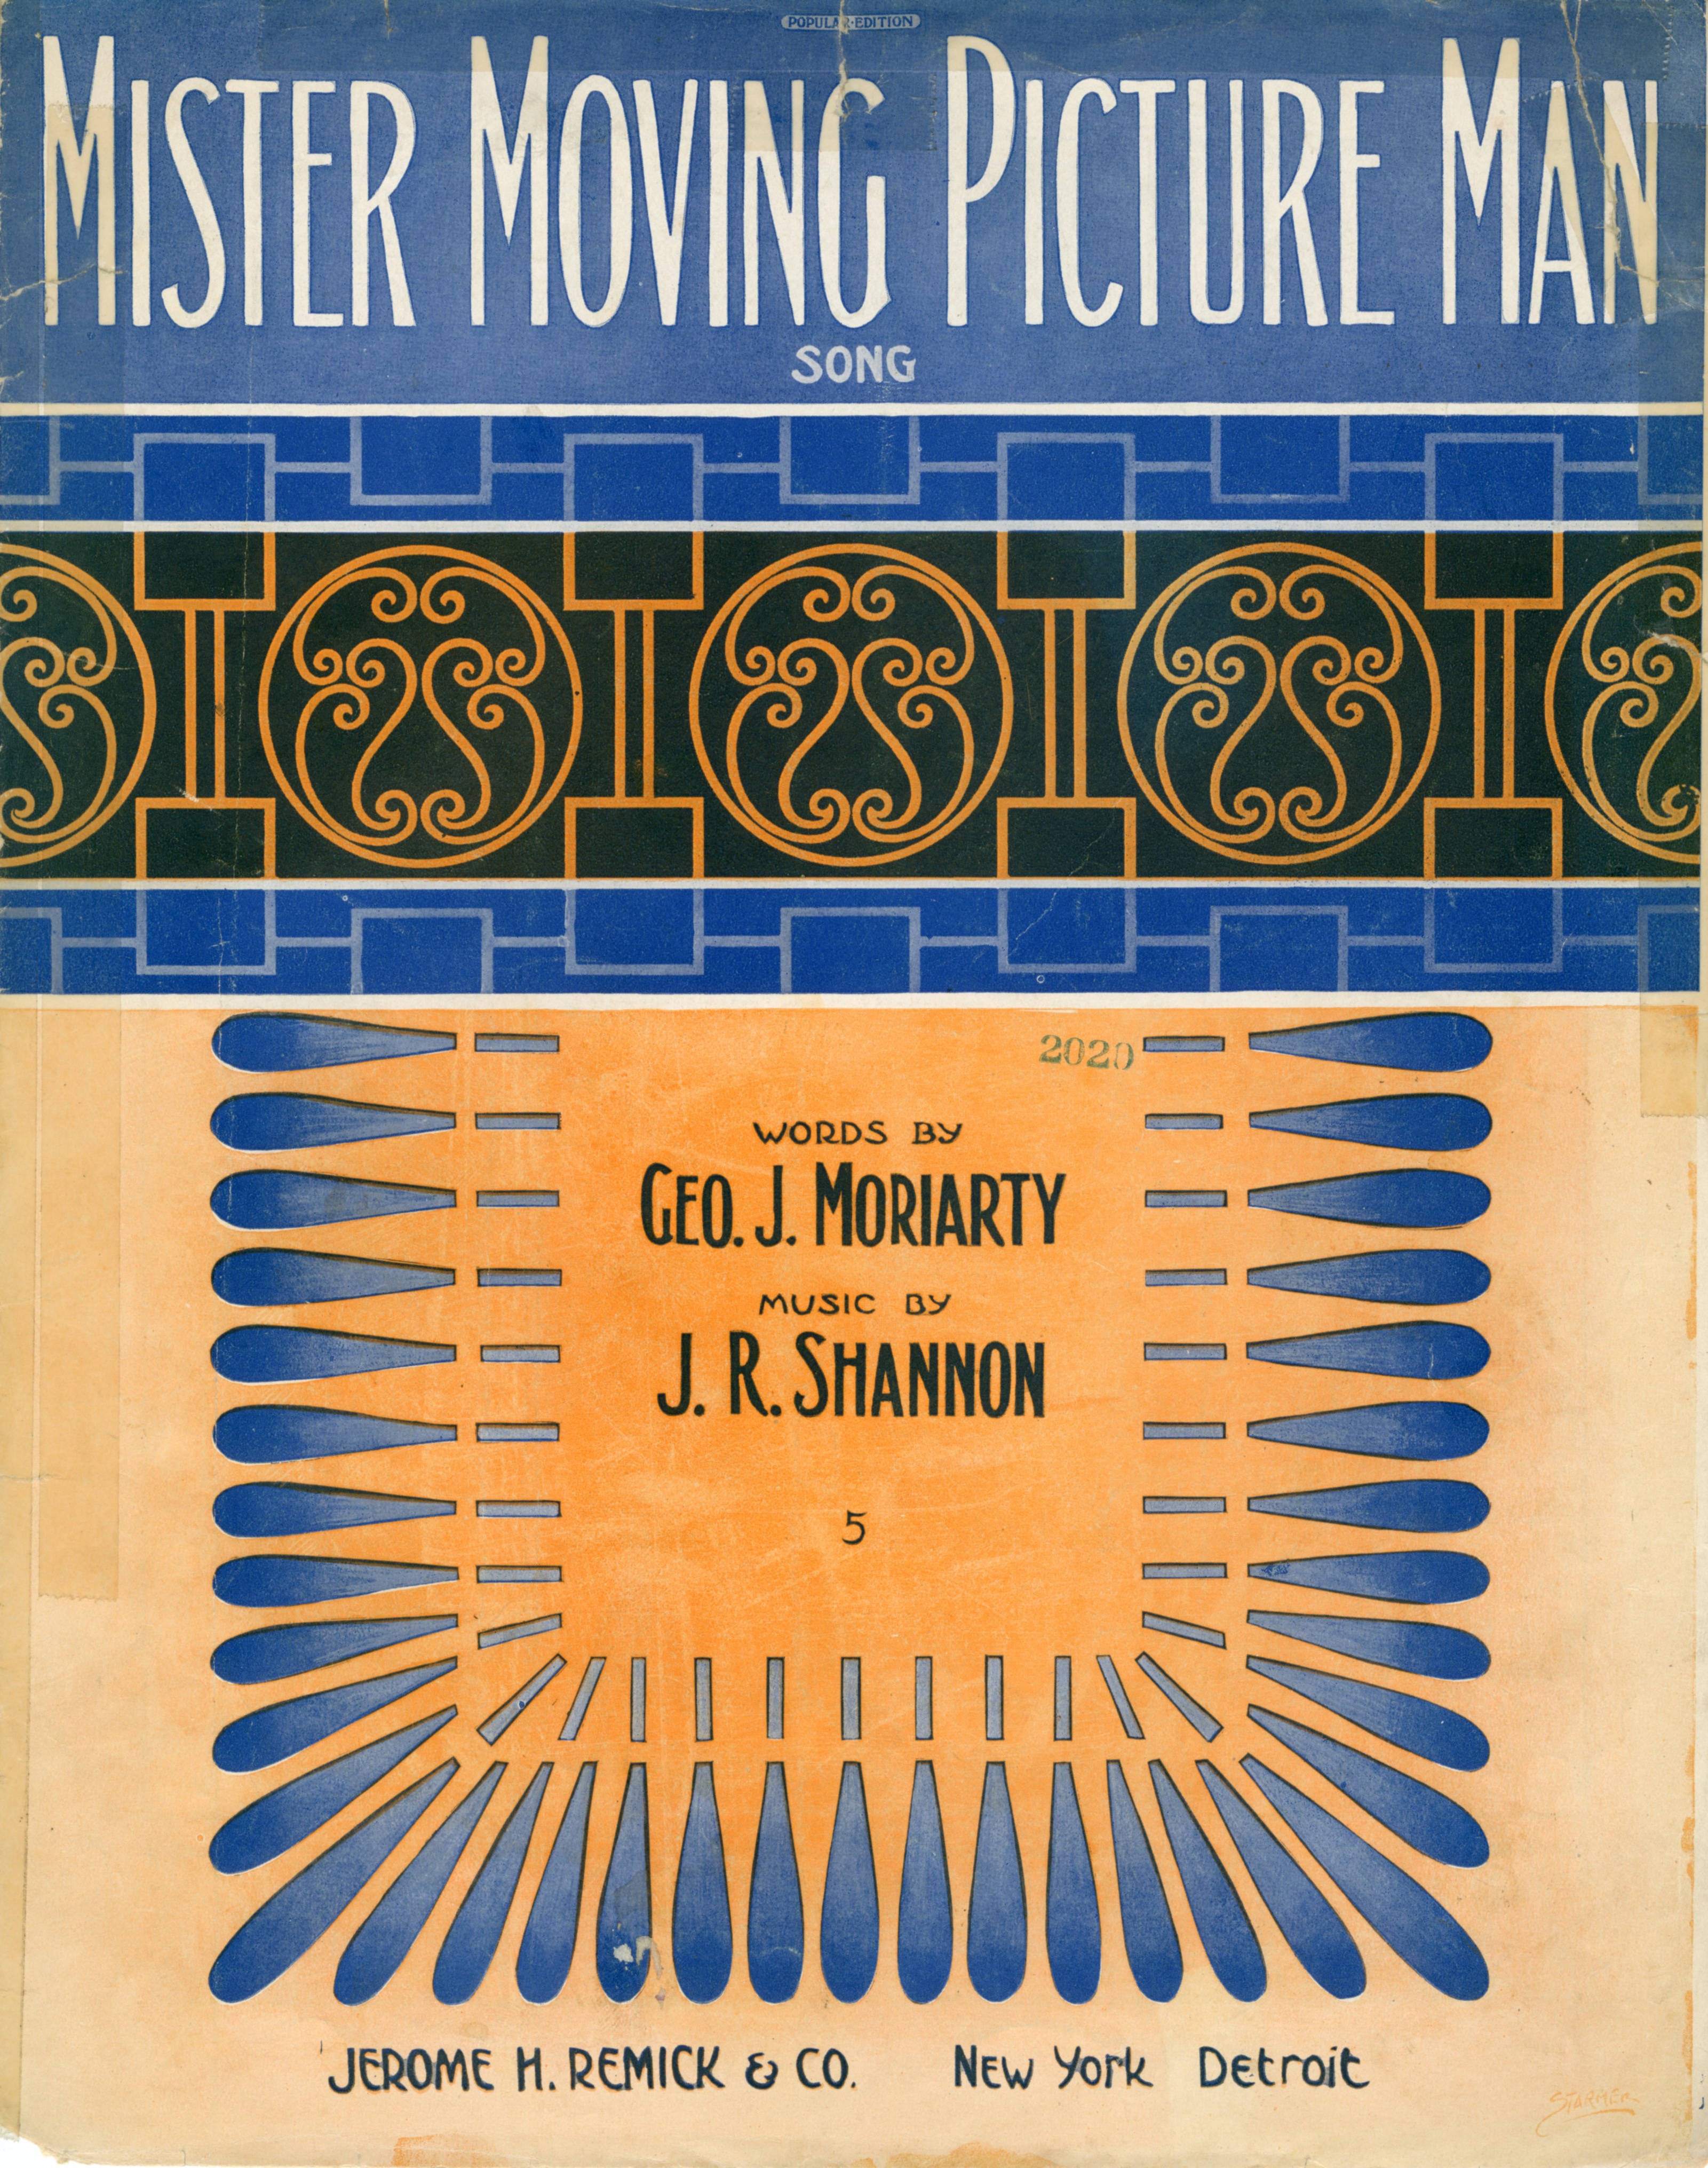 Sheet music cover - MISTER MOVING PICTURE MAN (1912)